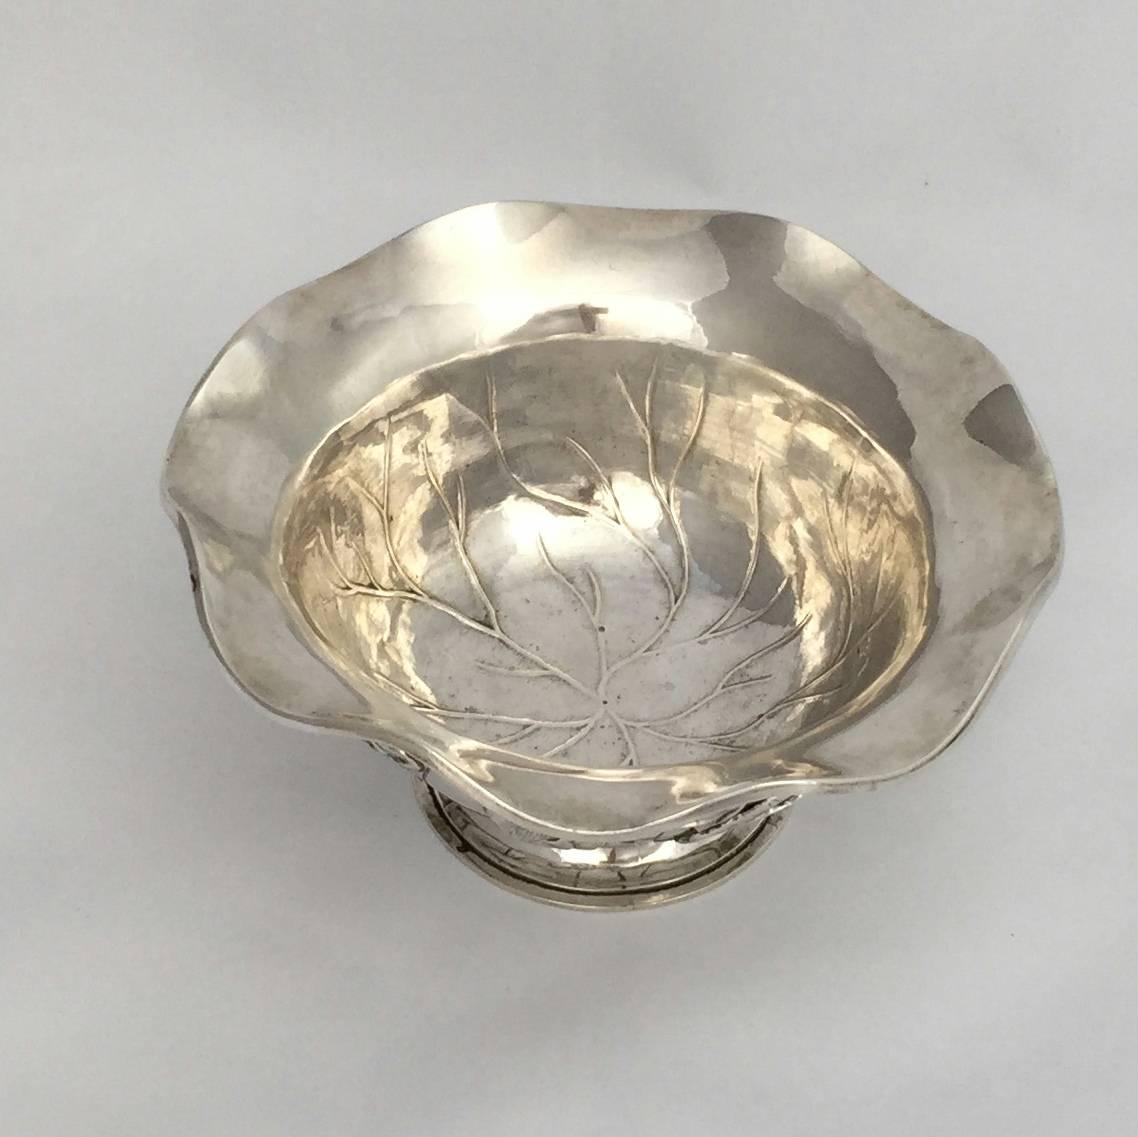 19th Century Chinese Export Silver Bowl by Luen Wo with Lotus Detail